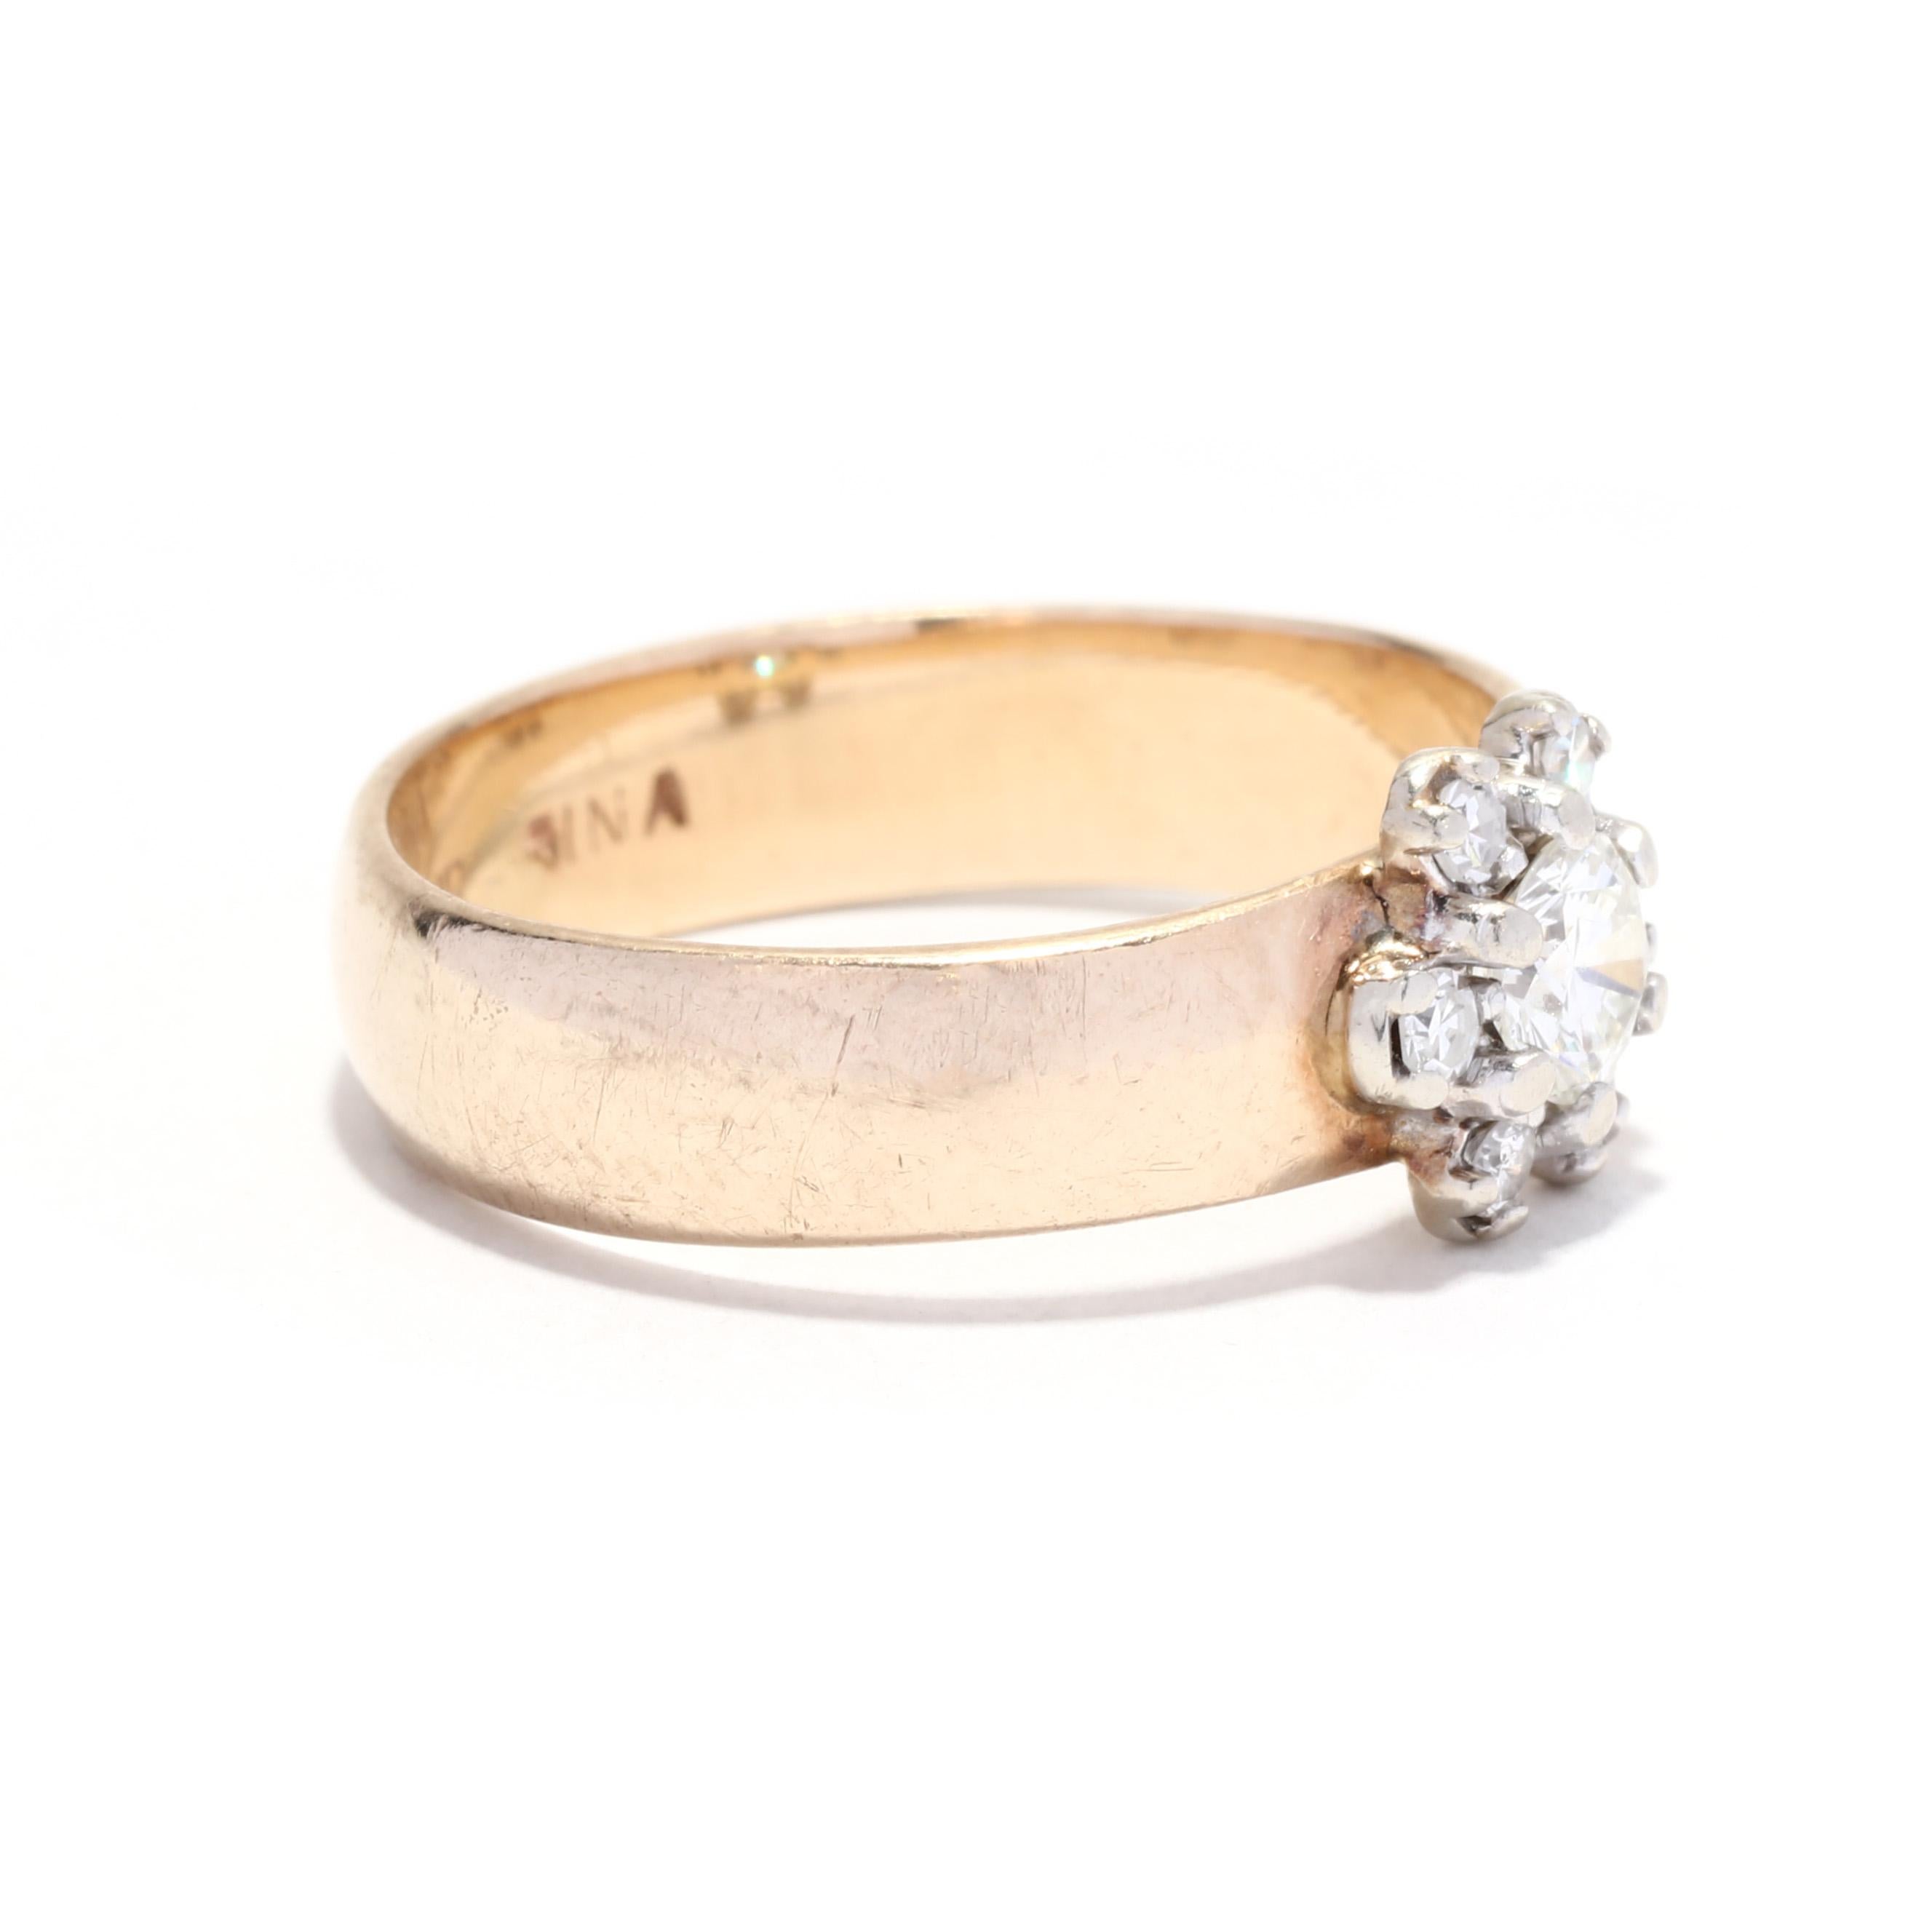 A vintage 10 karat yellow gold diamond cluster engagement ring. This stackable band features a slightly domed wide band with a flower cluster diamond accent weighing approximately .38 total carats.

Stones: 
- diamond
- round brilliant cut, 1